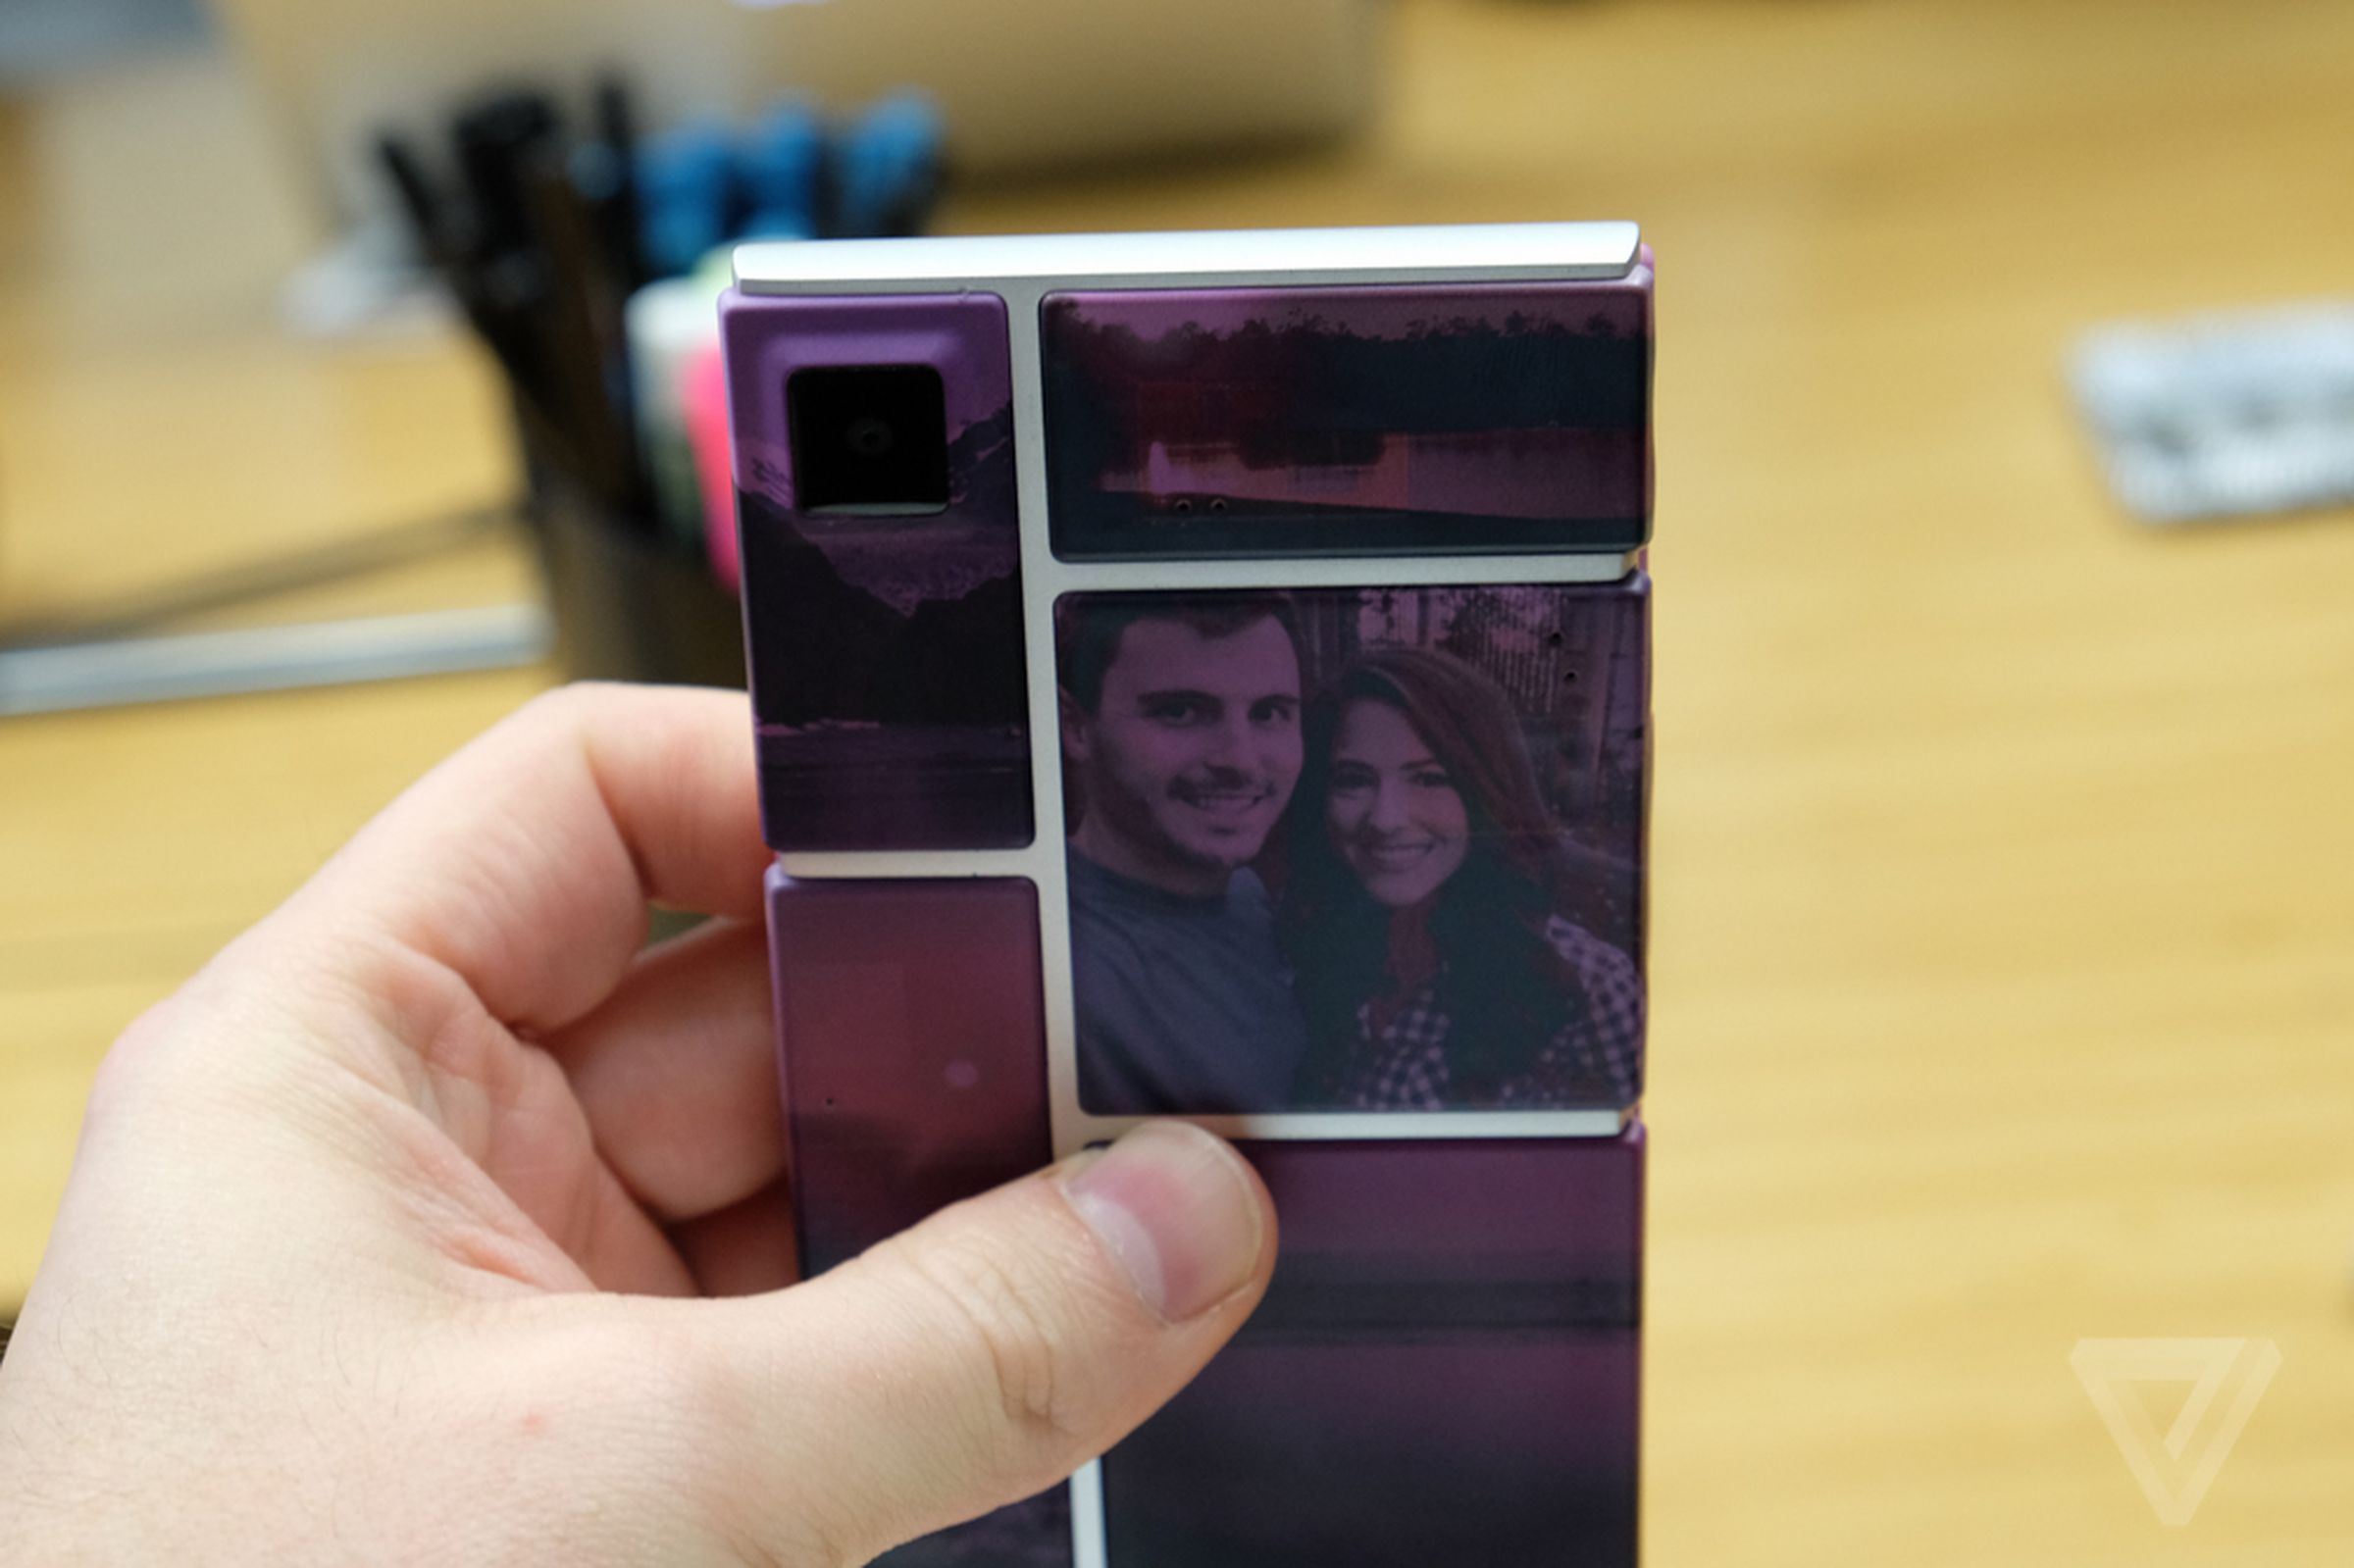 Project Ara Spiral 2 prototype hands-on